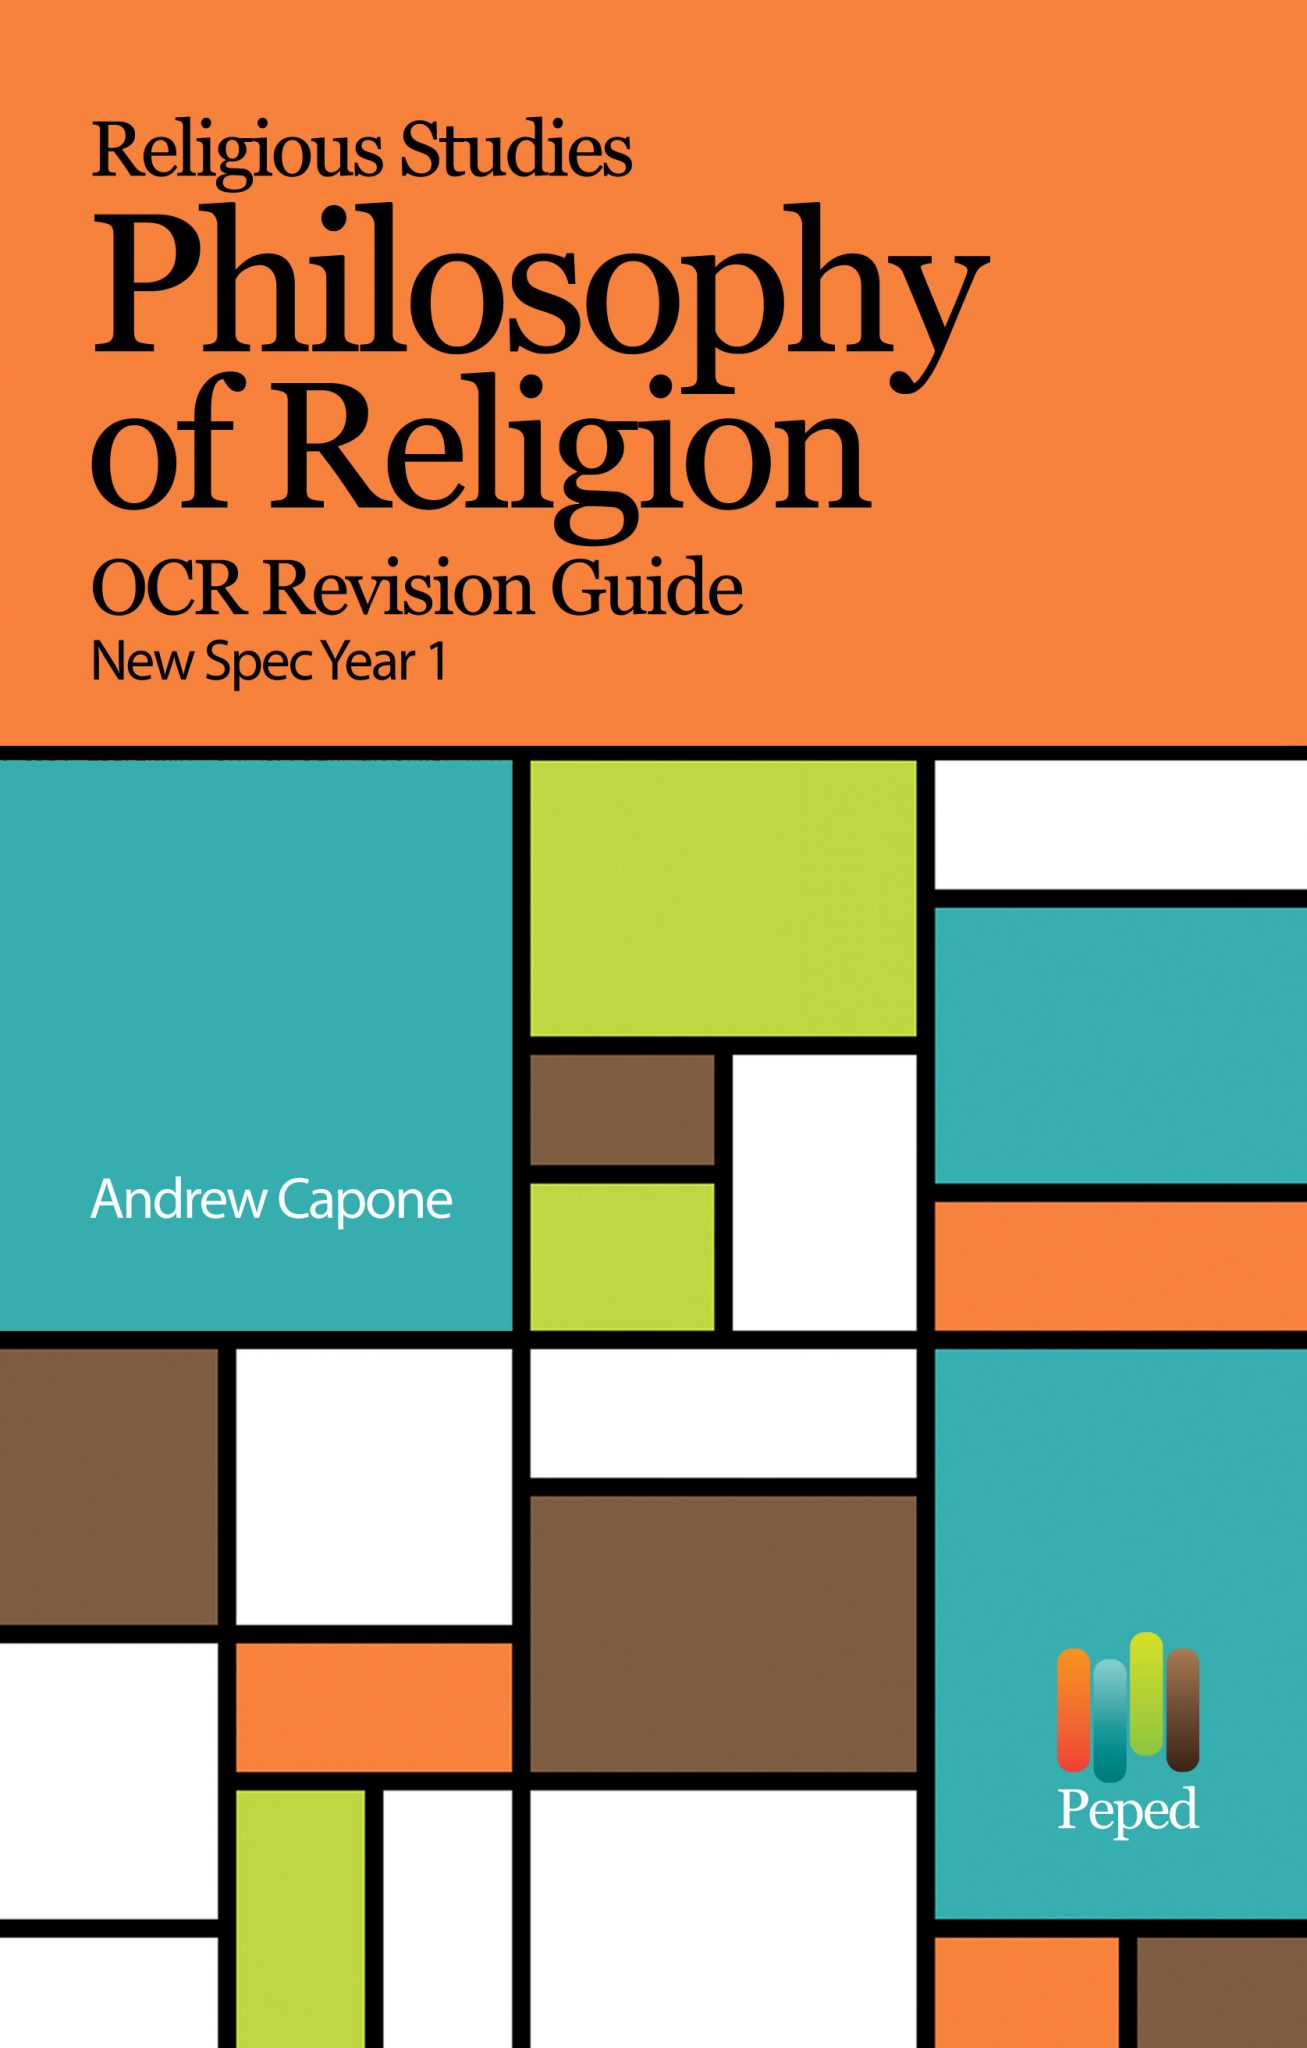 Religious Studies: Philosophy of Religion OCR Revision Guide New Spec Year 1